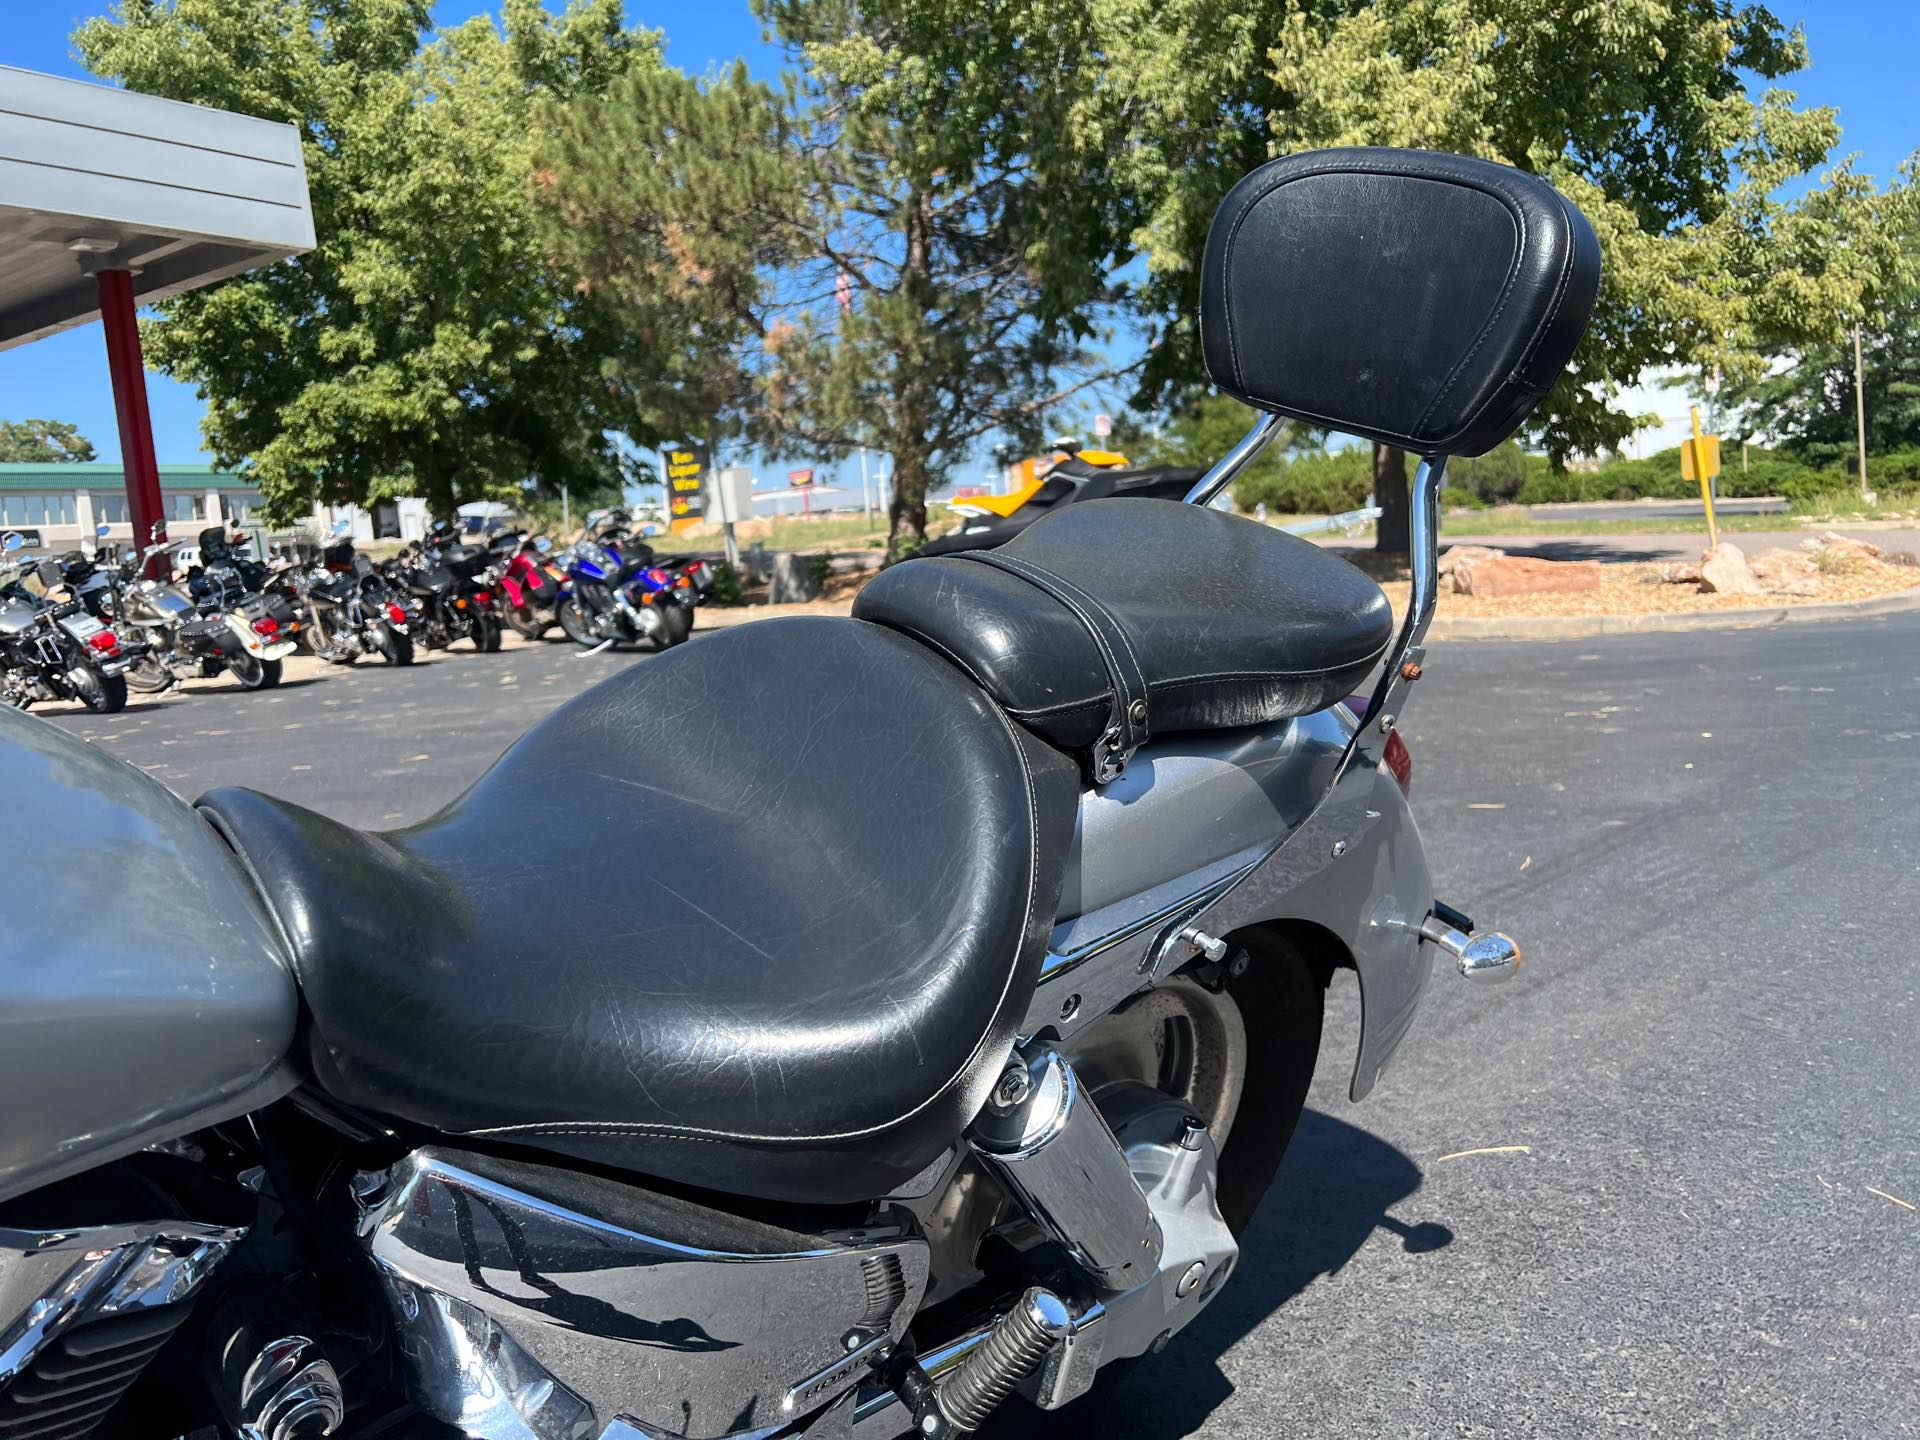 2006 Honda VTX 1300 R at Aces Motorcycles - Fort Collins